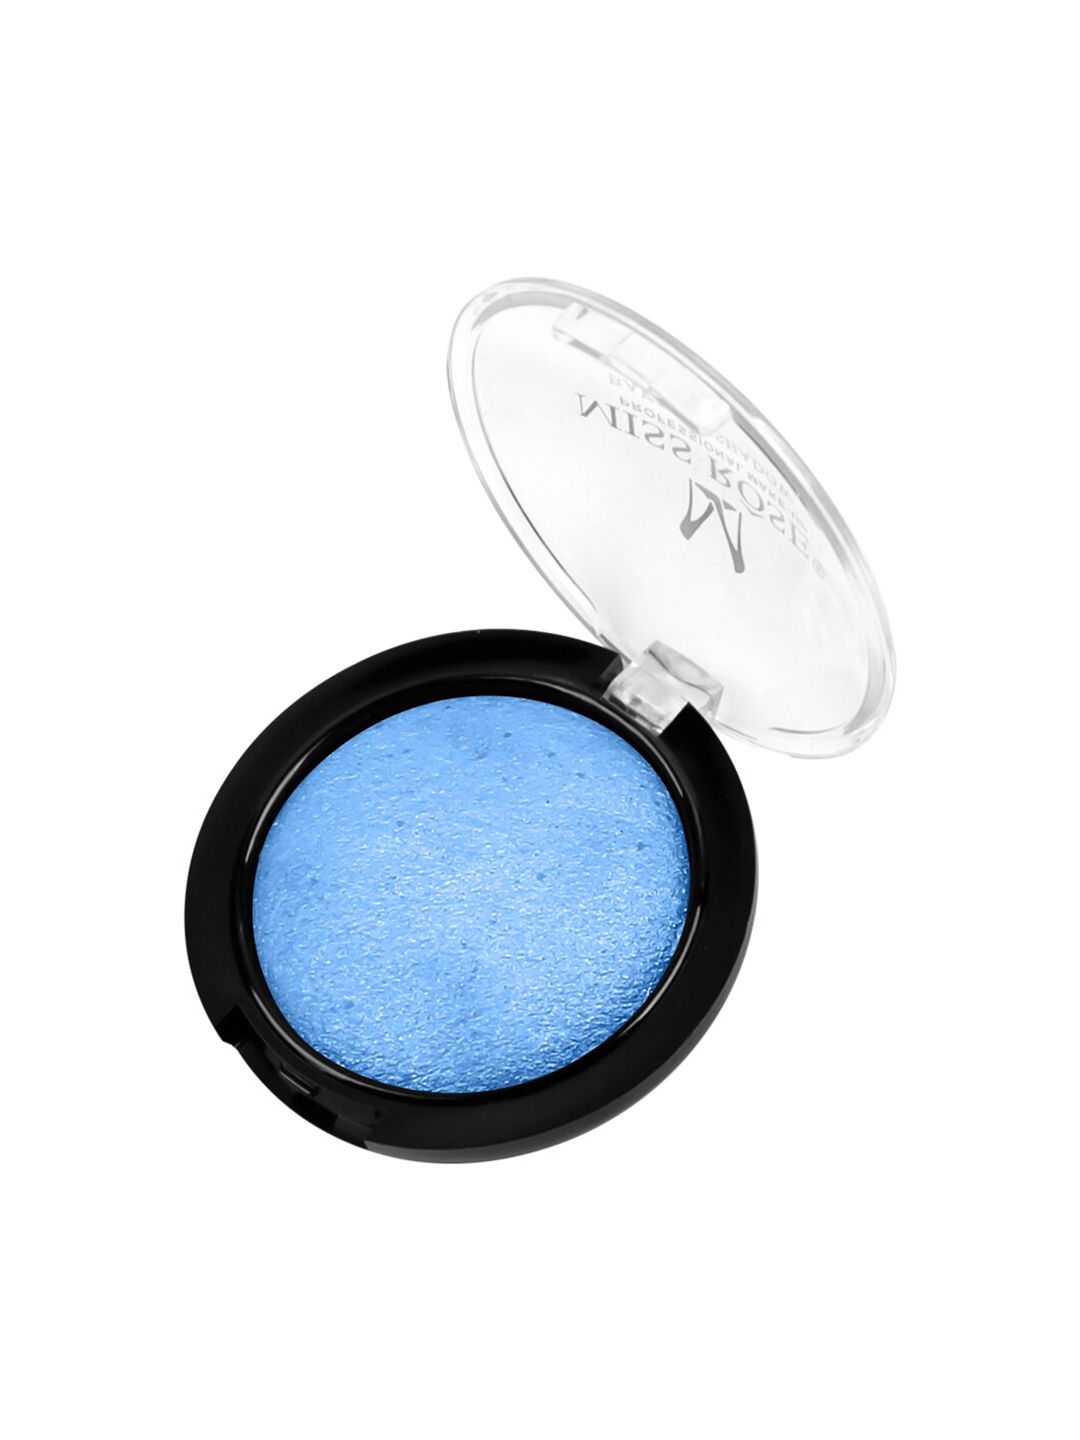 MISS ROSE MonochroMe Baked Eyeshadow 7001-073M 09 Price in India